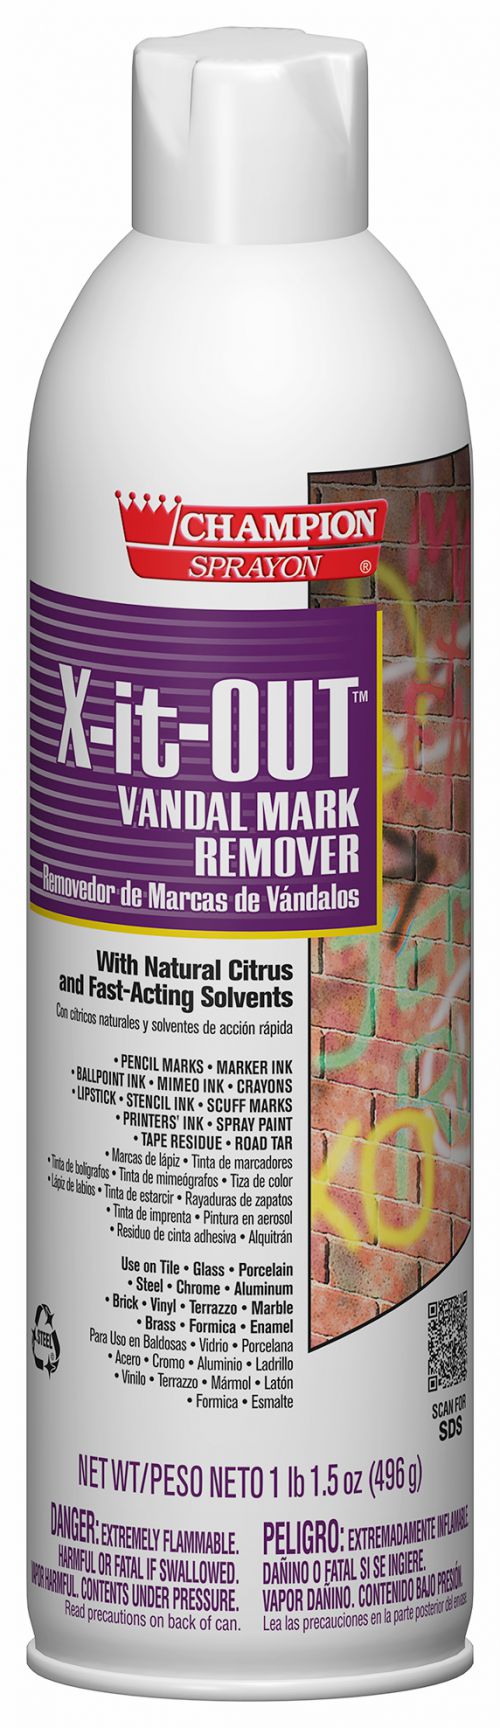 Chase Aerosol X-IT OUT Vandal Mark Remover Pack 12/17.5o